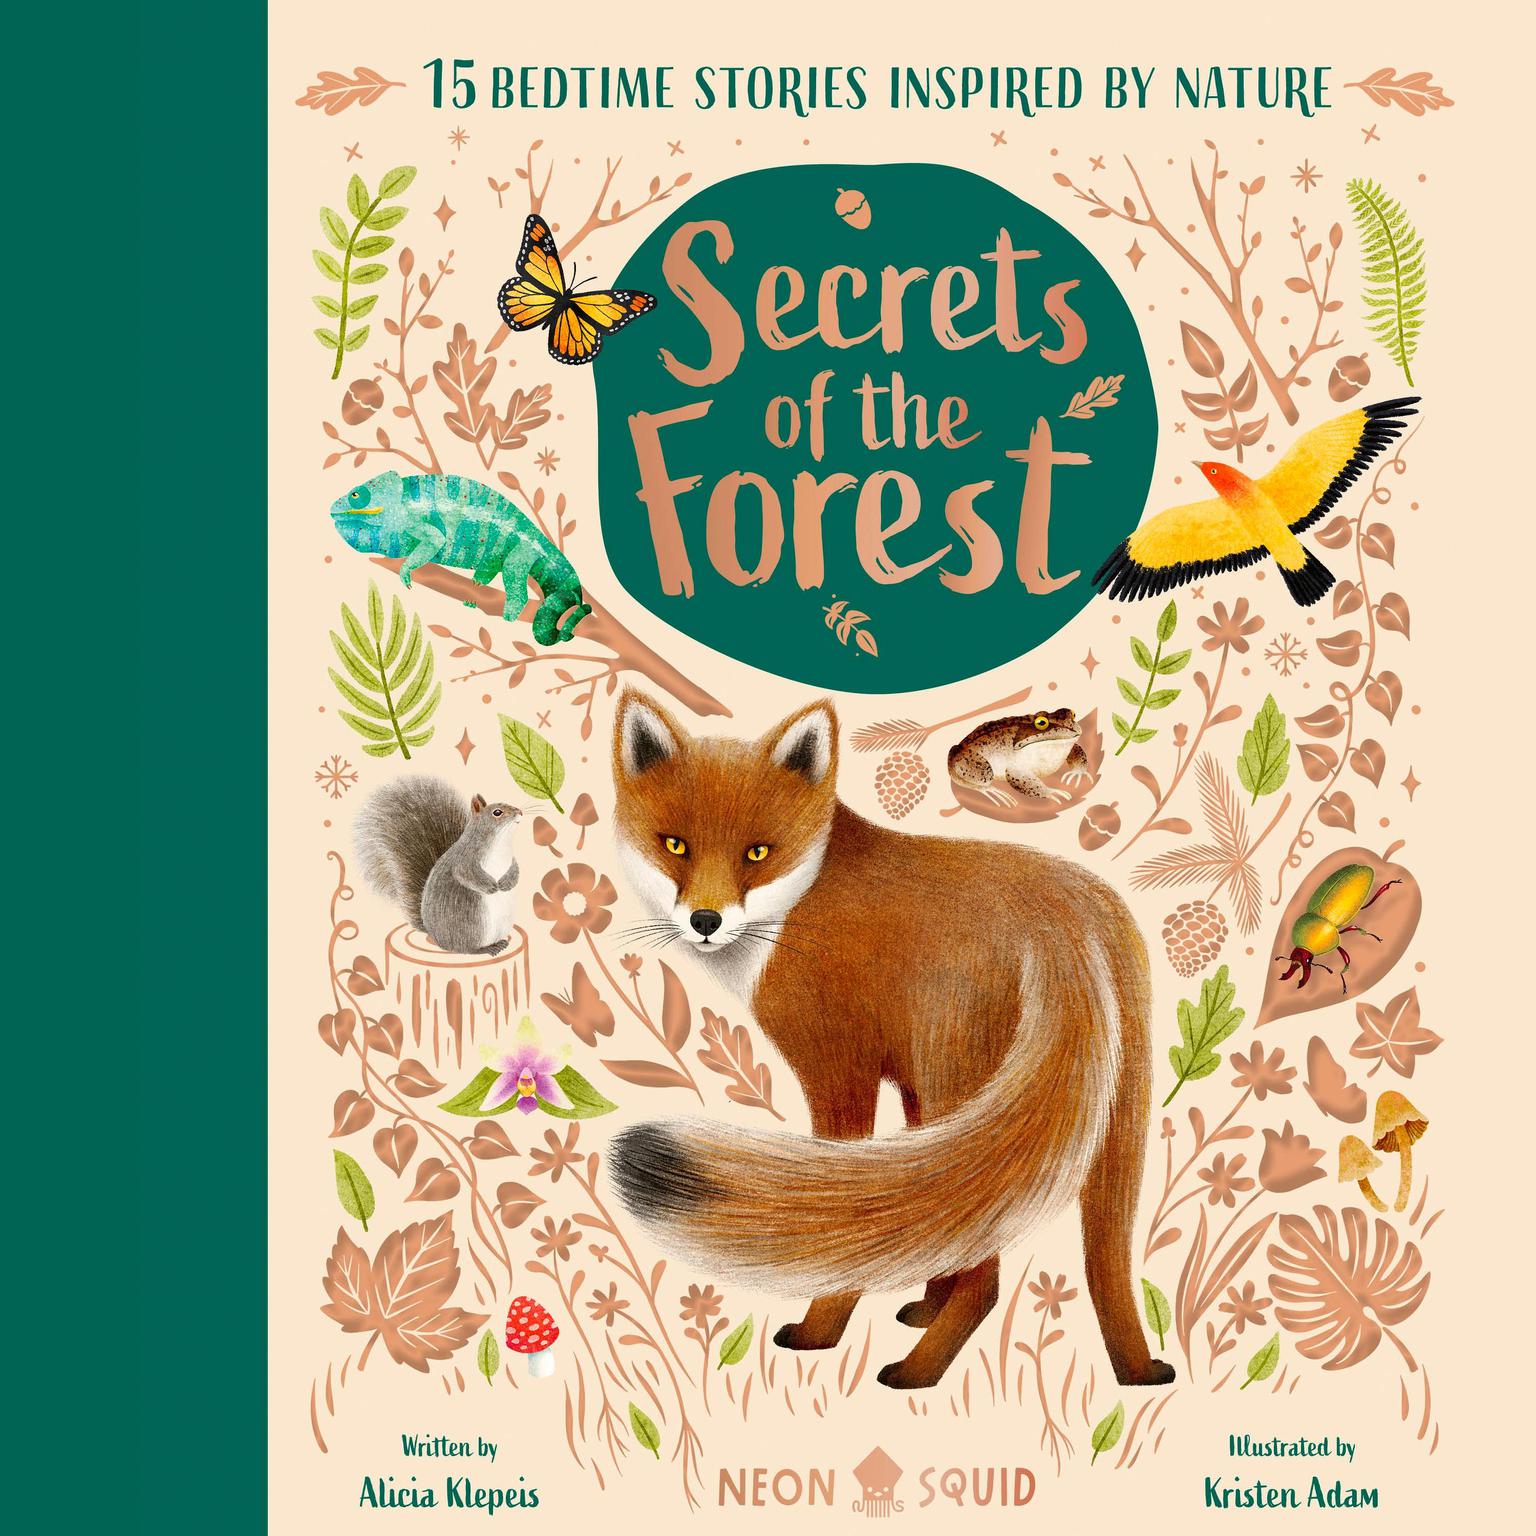 Secrets of the Forest: 15 Bedtime Stories Inspired by Nature Audiobook, by Alicia Klepeis